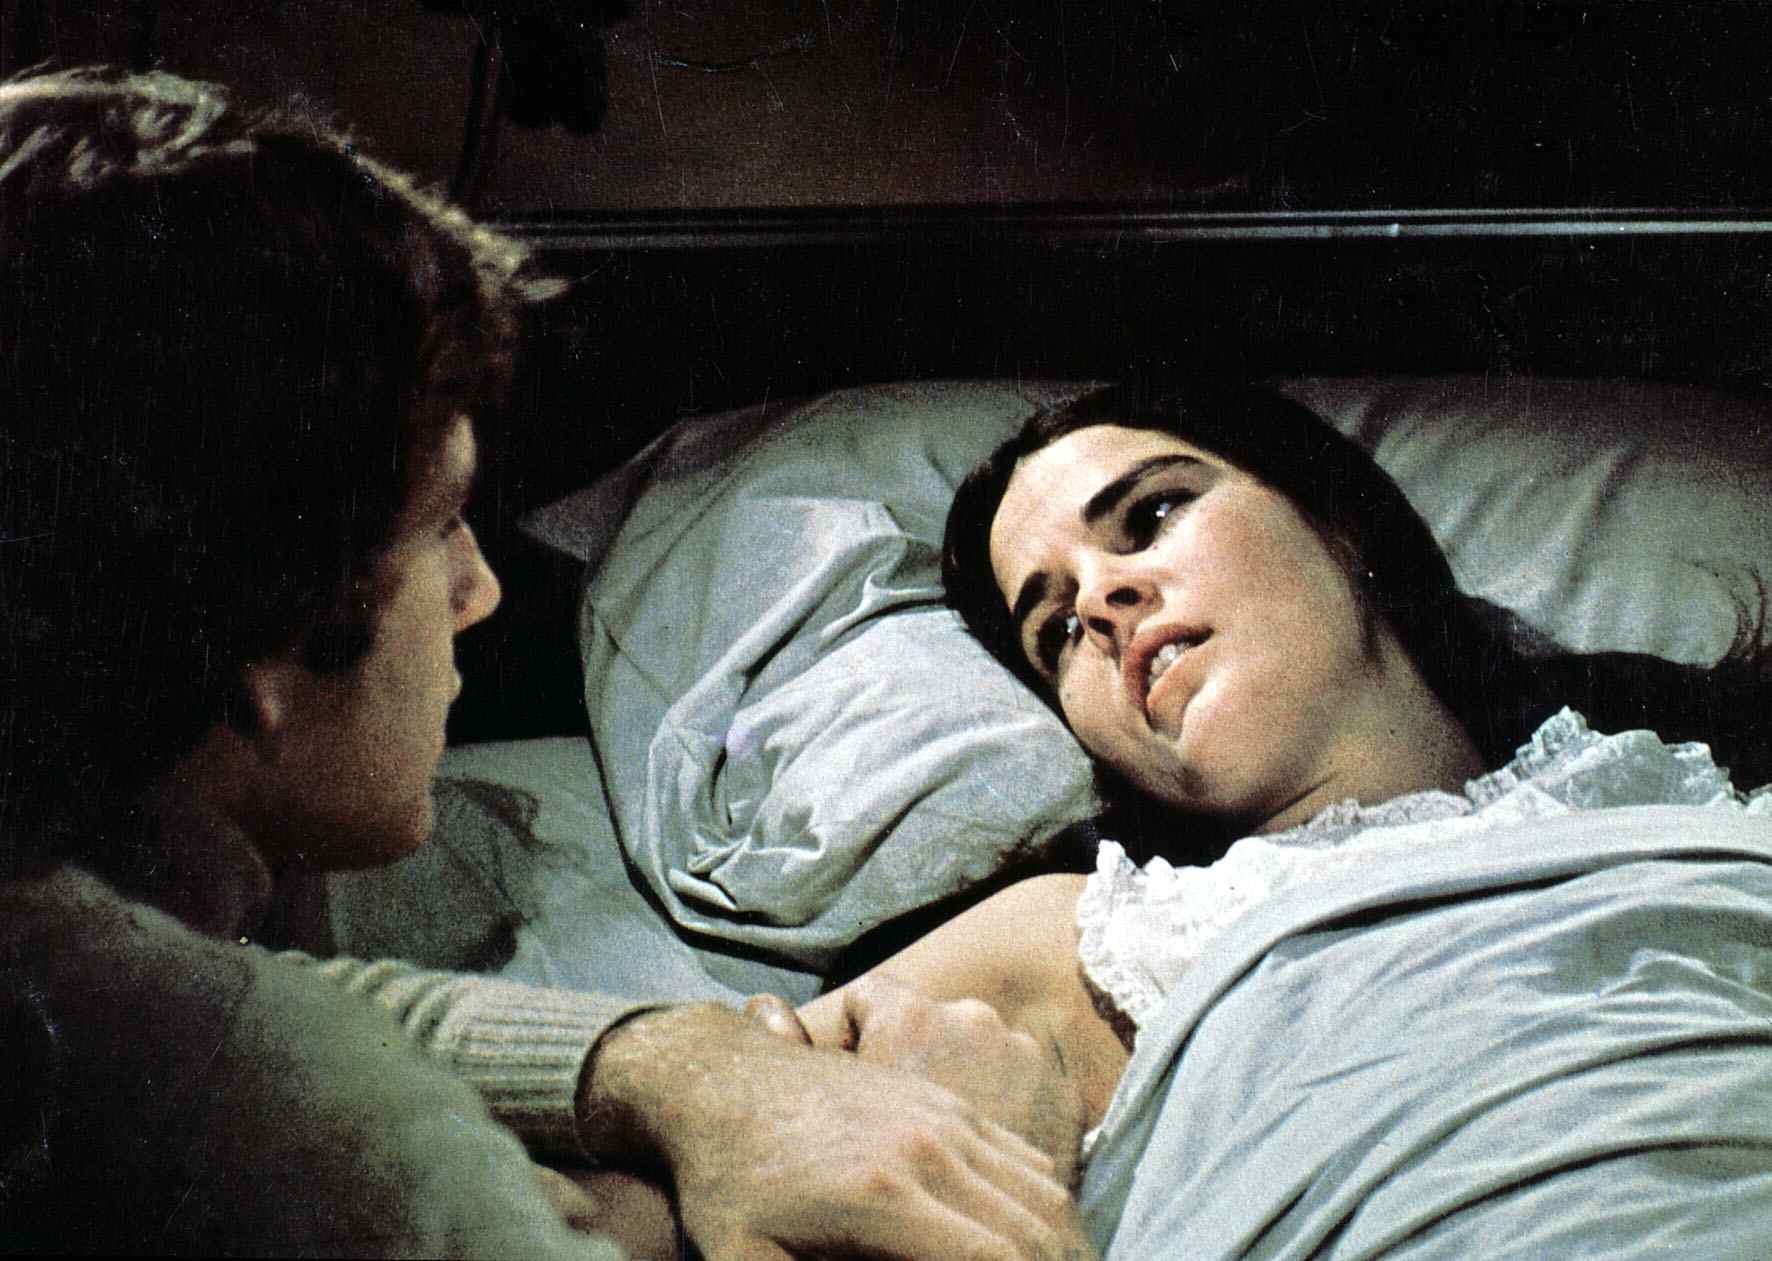 Ali MacGraw and Ryan O'Neal stars in the 1970 film "Love Story." | Source: Getty Images